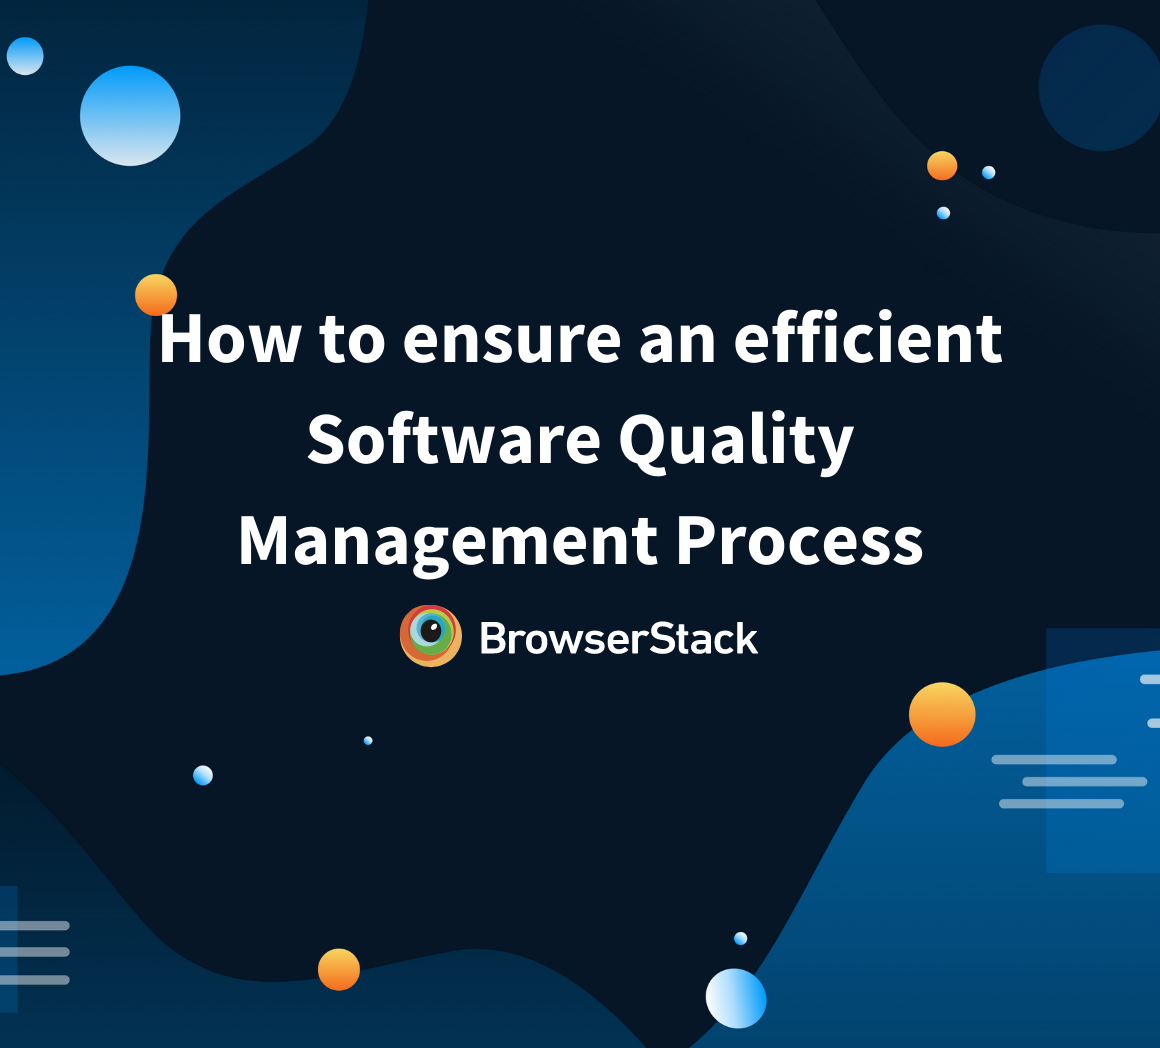 How To Ensure An Efficient Software Quality Management Process